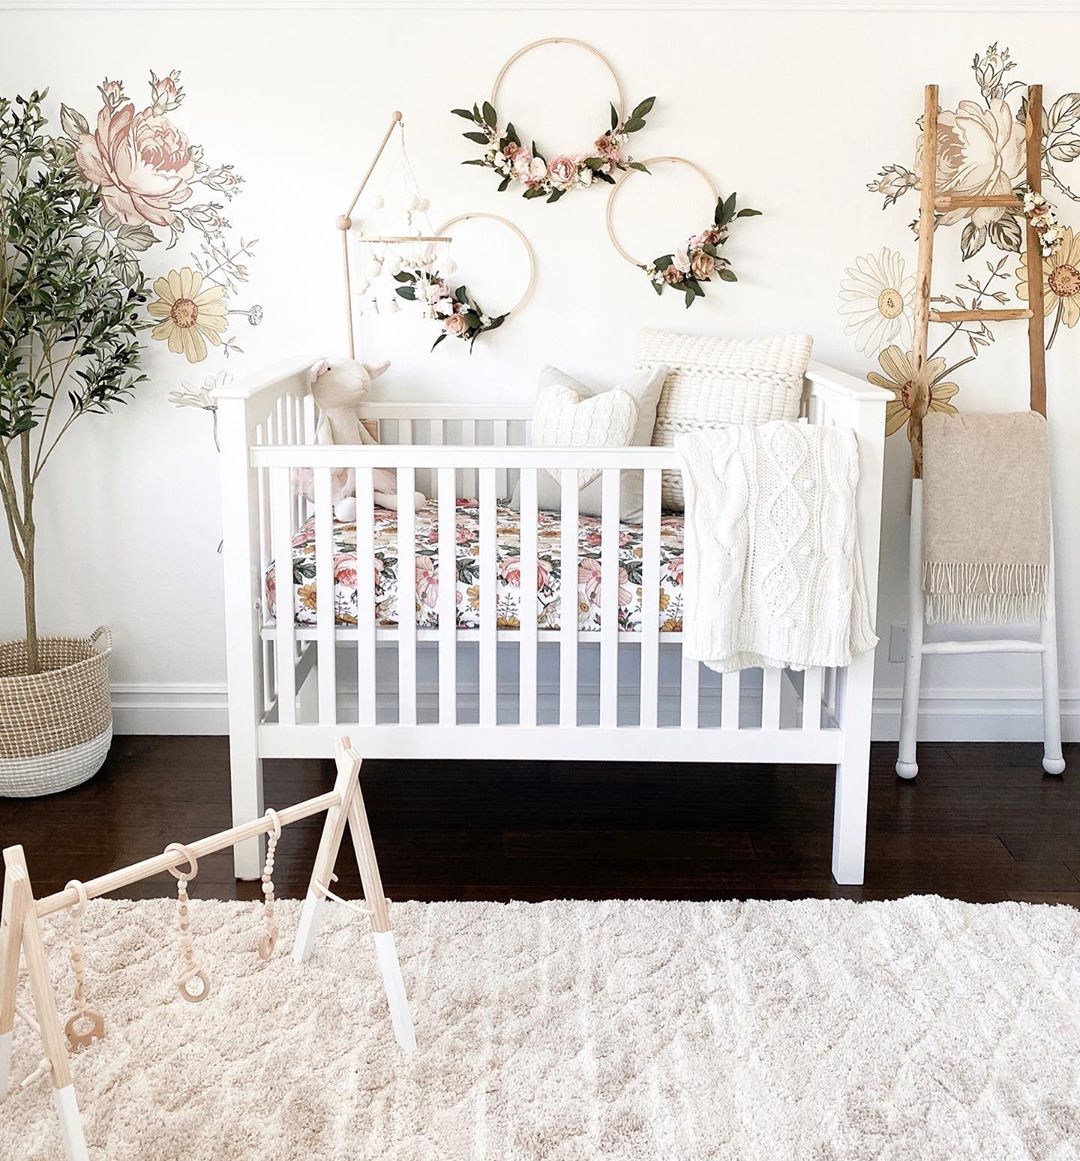 Floral themed nursery. Photo by Instagram user @house.becomes.home